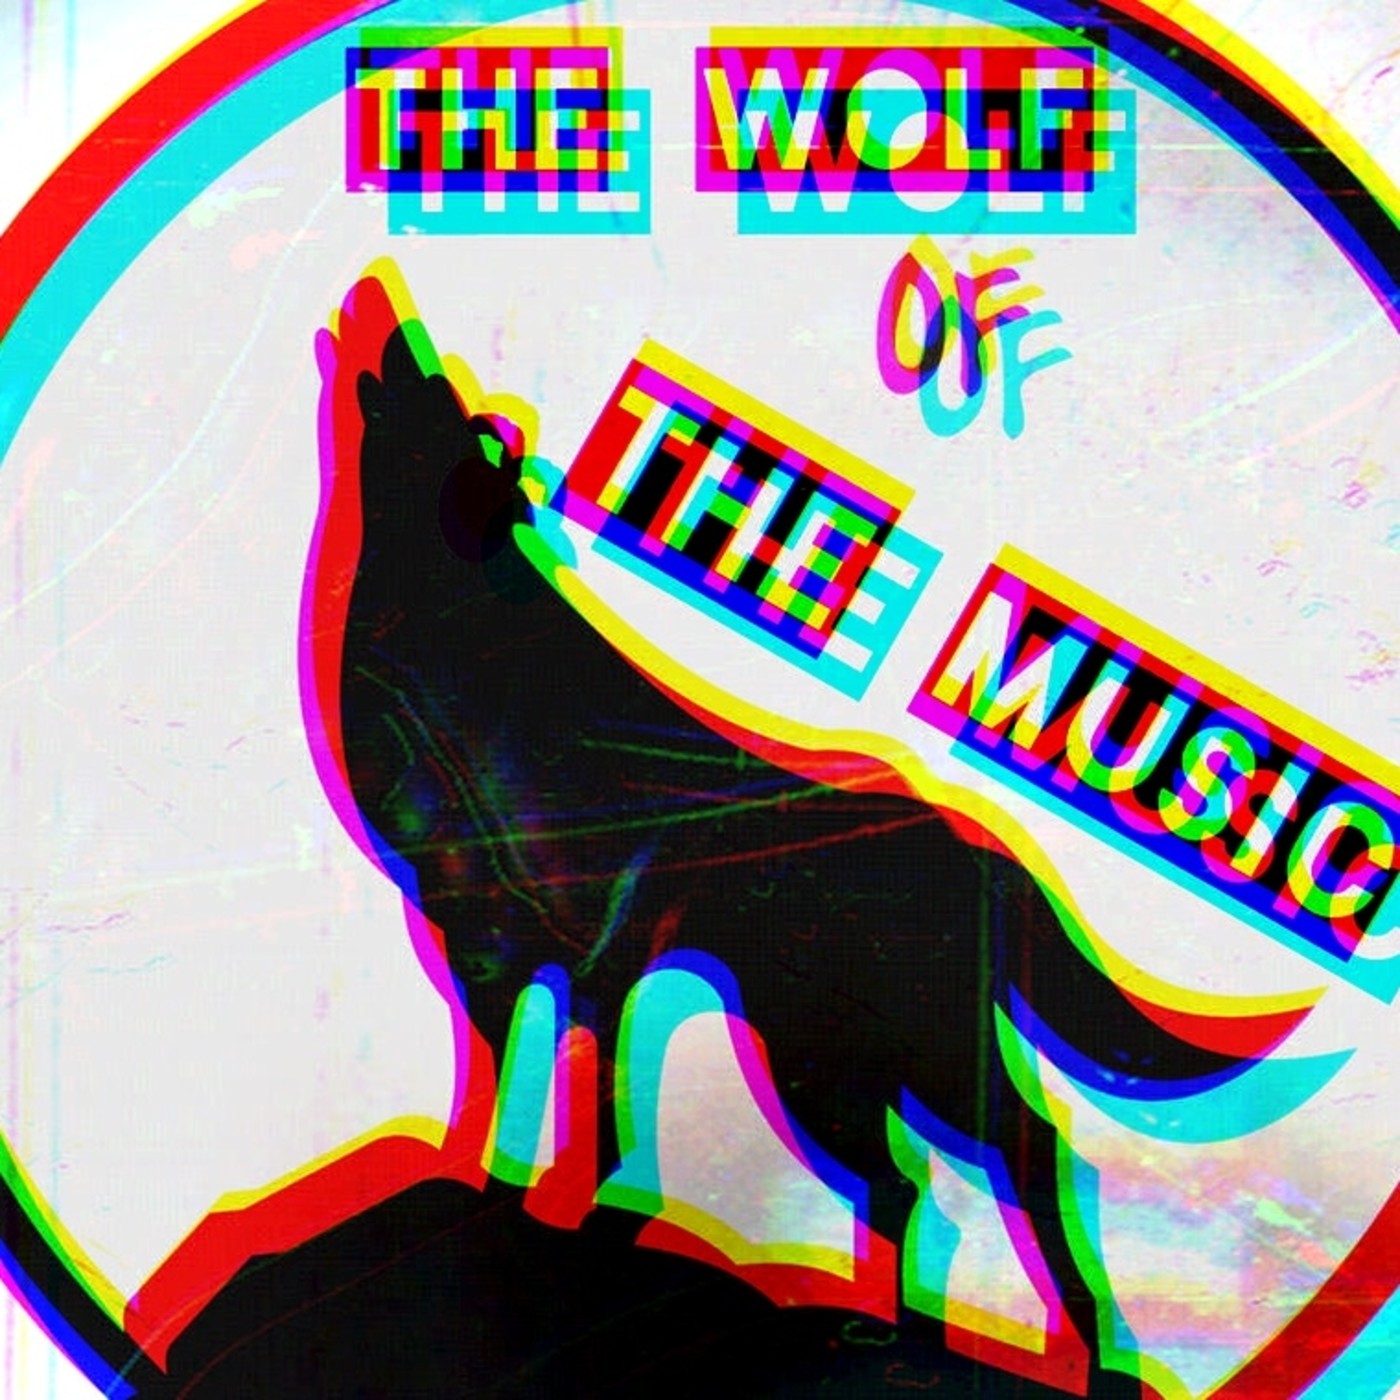 THE WOLF OF THE MUSIC